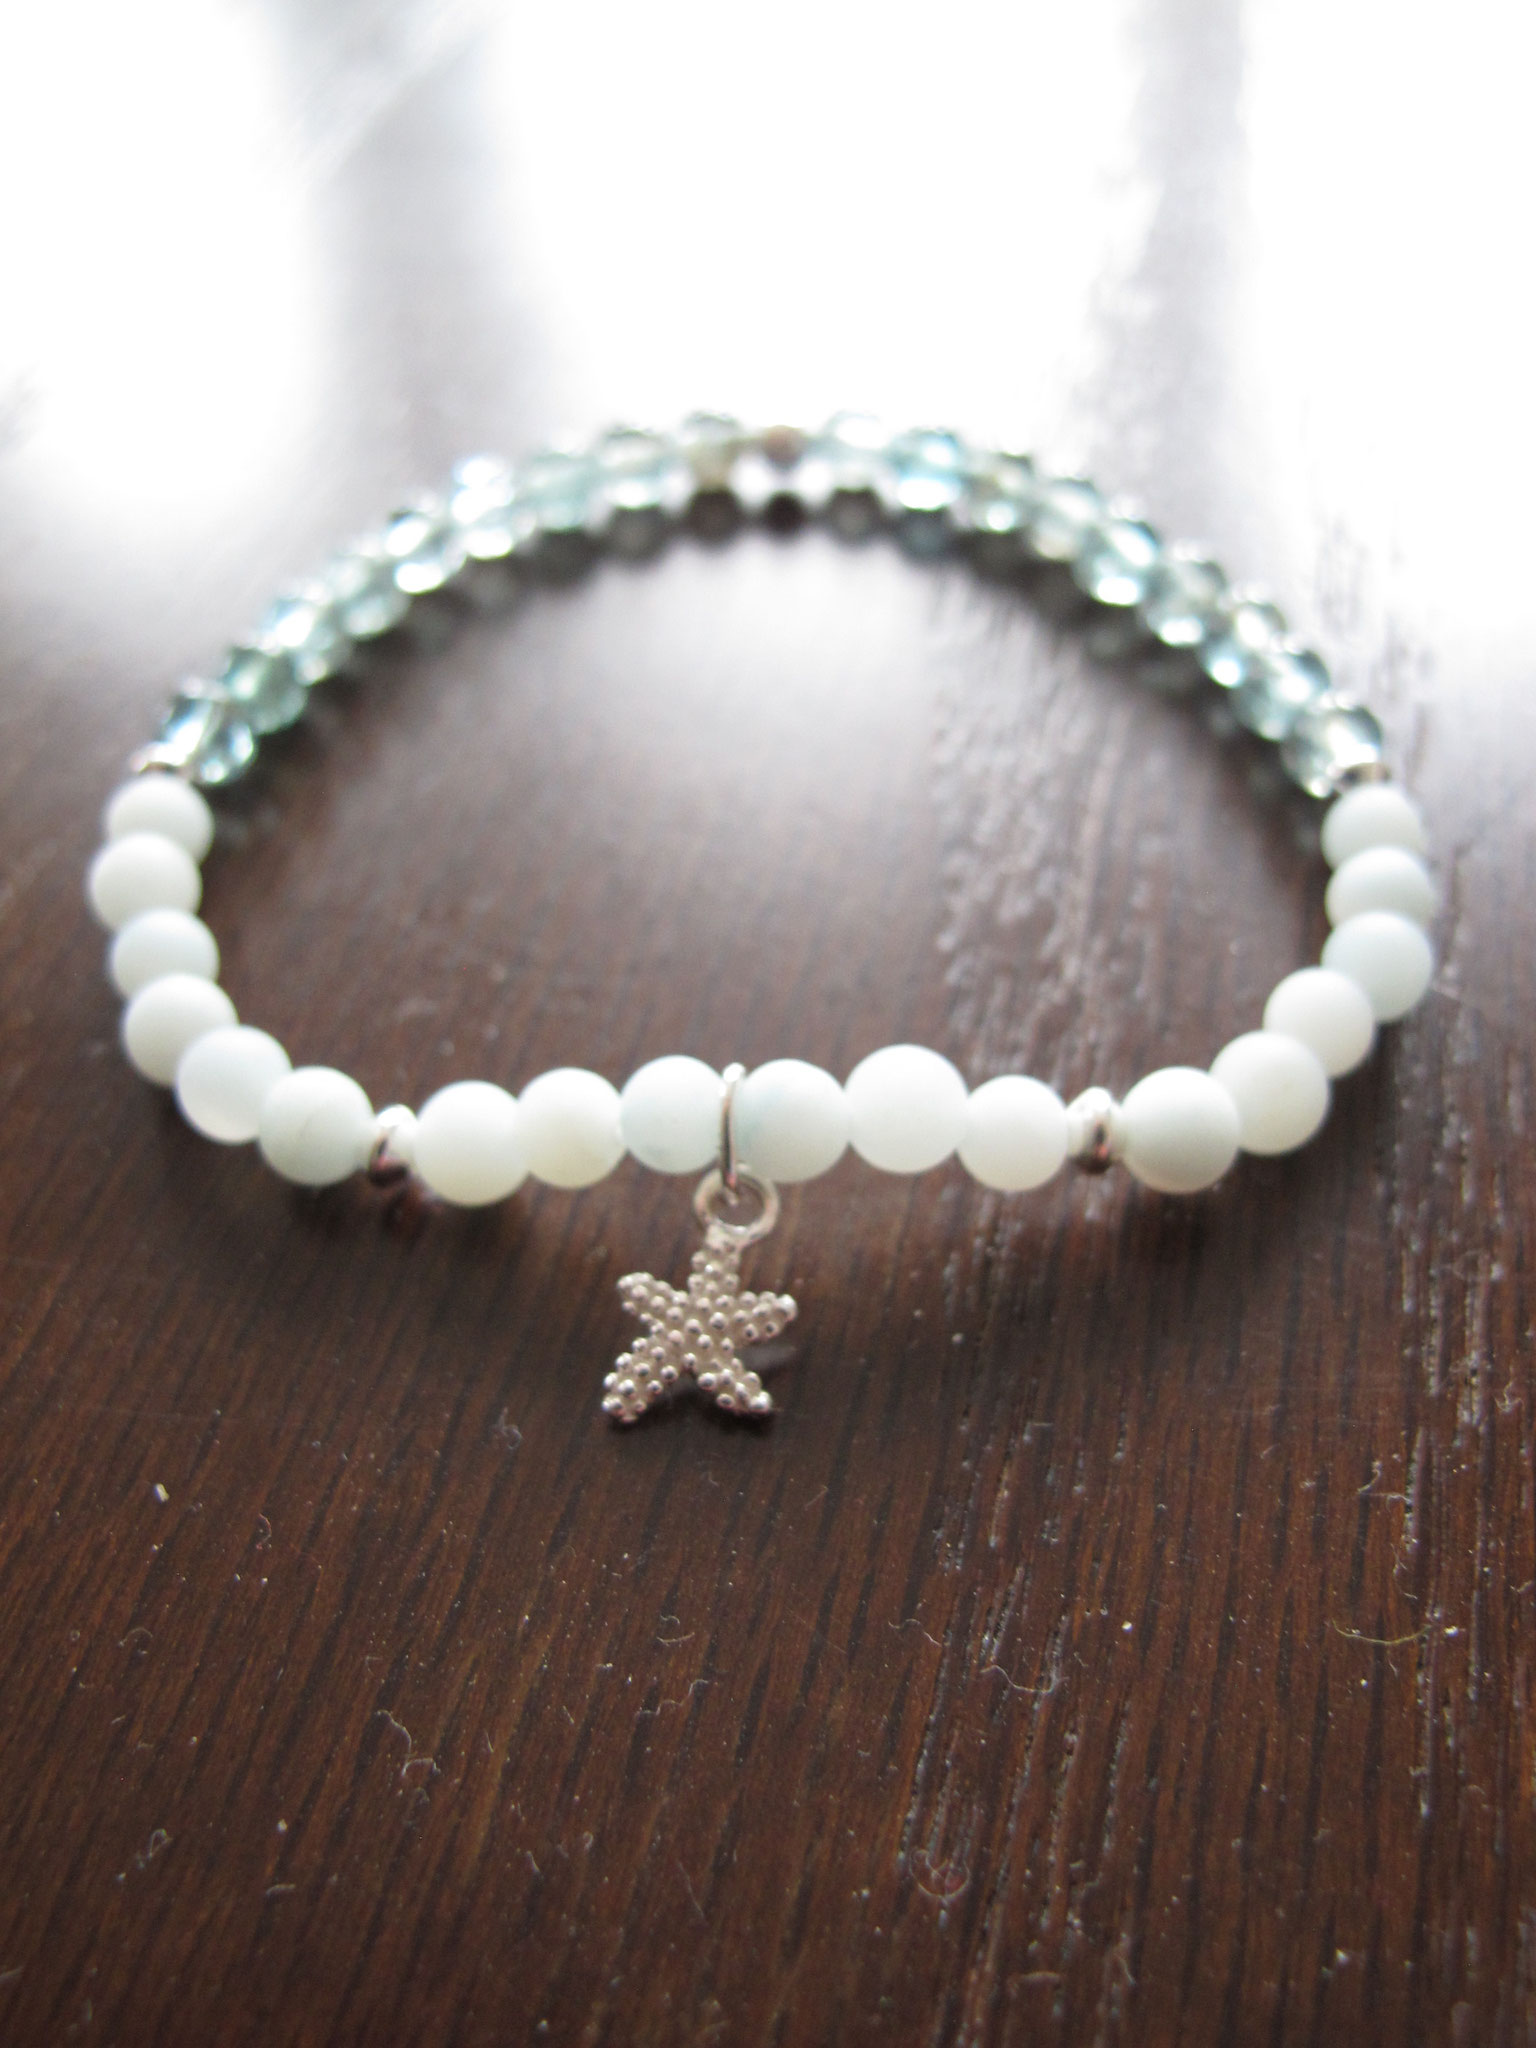 Milky amazonite in combination with see-through apatite and a 925 Sterling silver starfish charm (sold) 